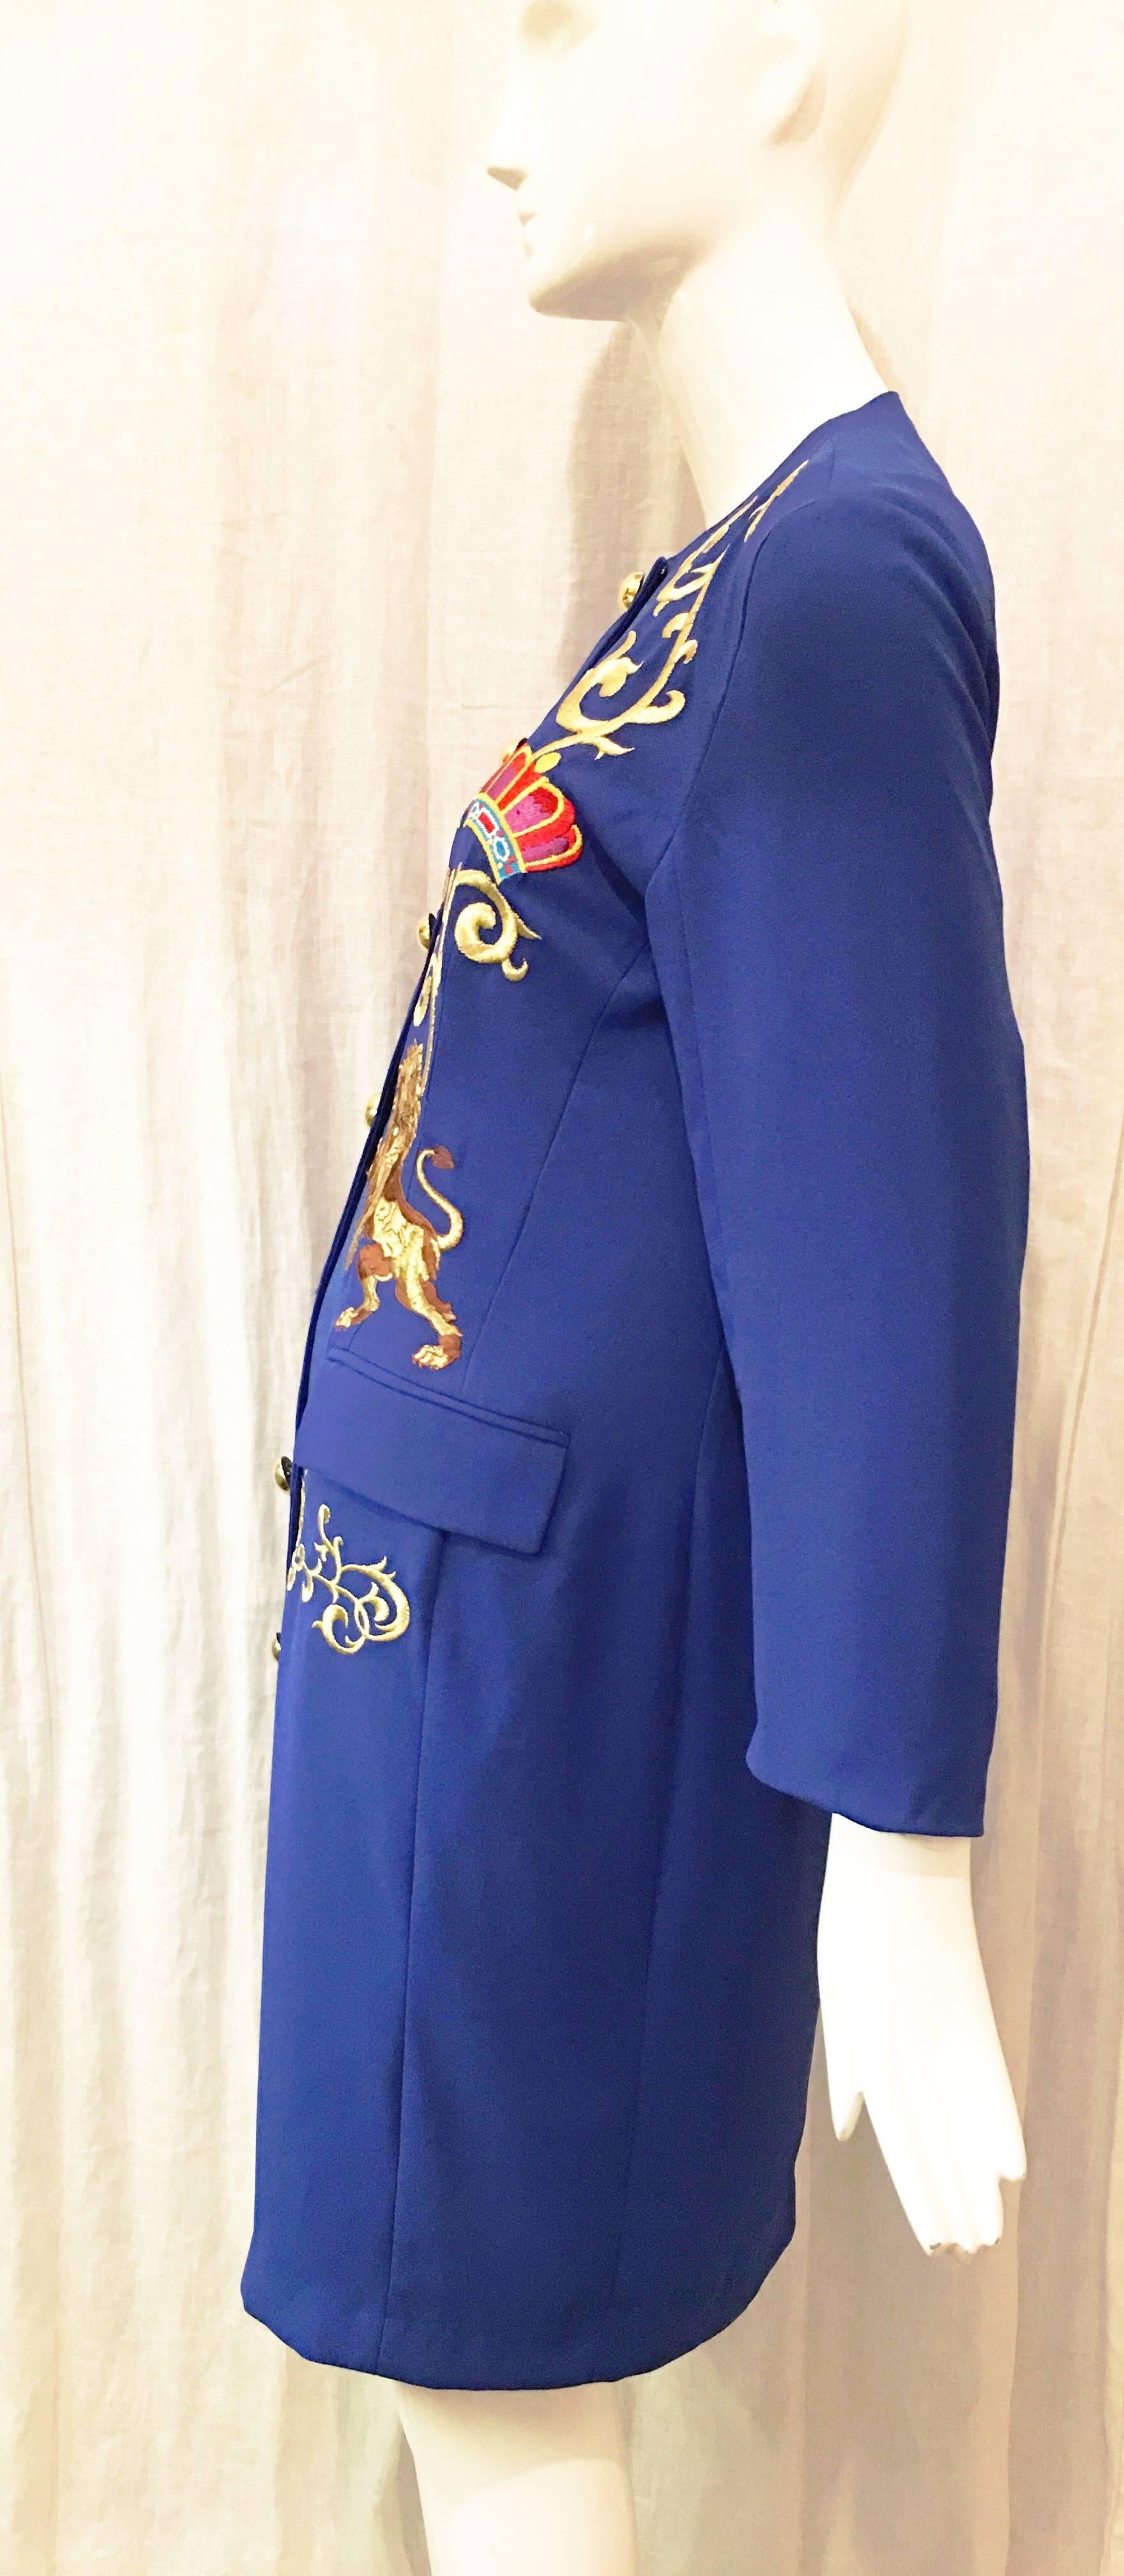 Cobalt blue long blazer-style jacket with embroidered lions. Seven gold buttons down the front of the jacket (one button missing). Gold tone curly cue embroidered design above crown and lion embroidery and at front waist. Collarless. Sleeves hit